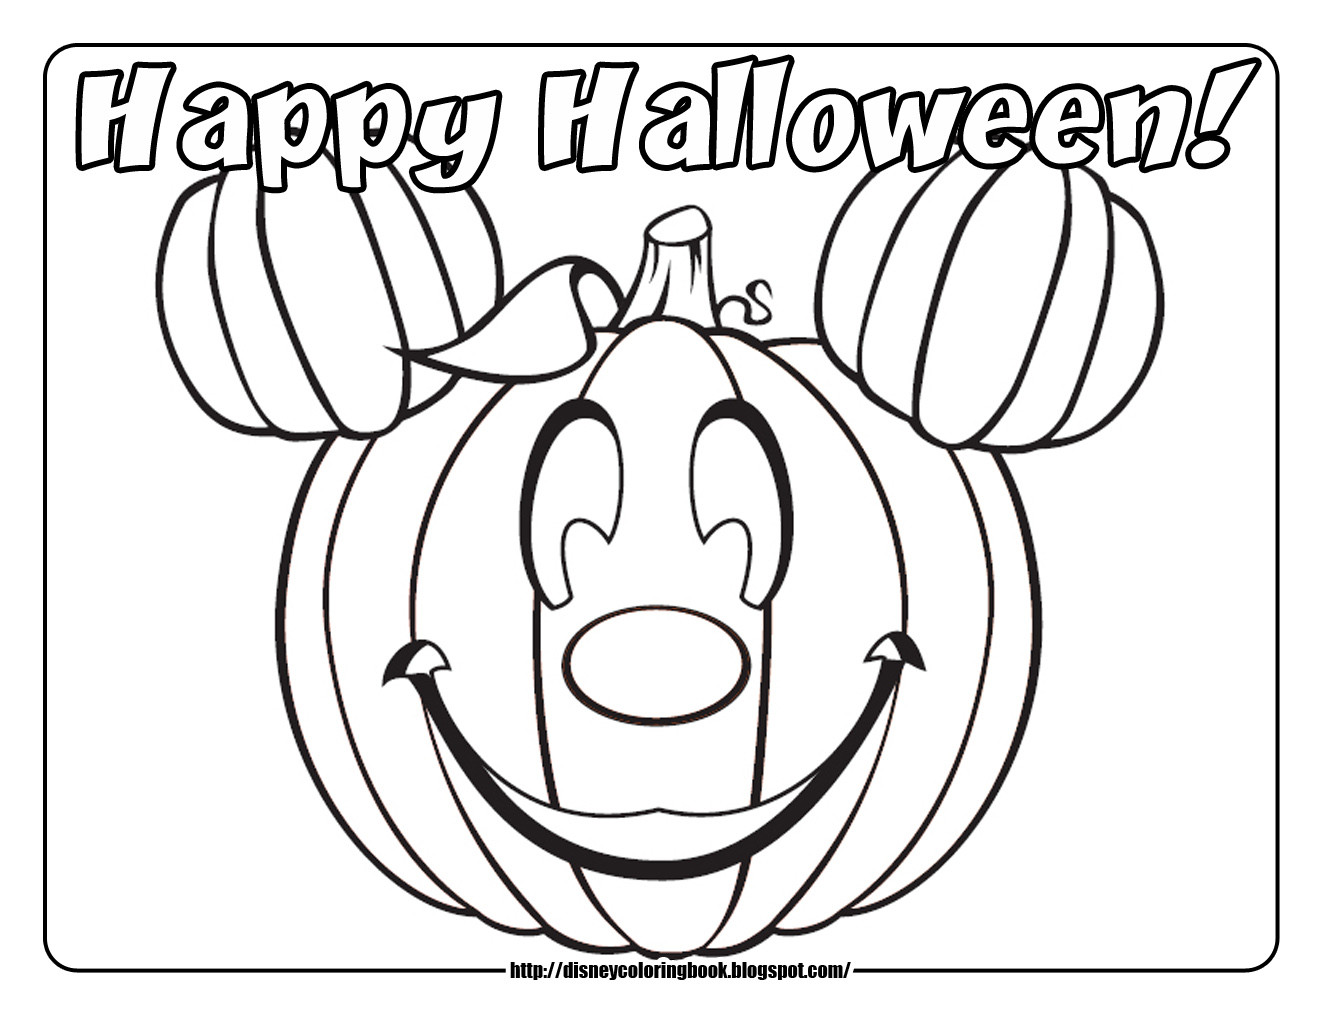 Printable Coloring Pages Halloween
 Disney Coloring Pages and Sheets for Kids